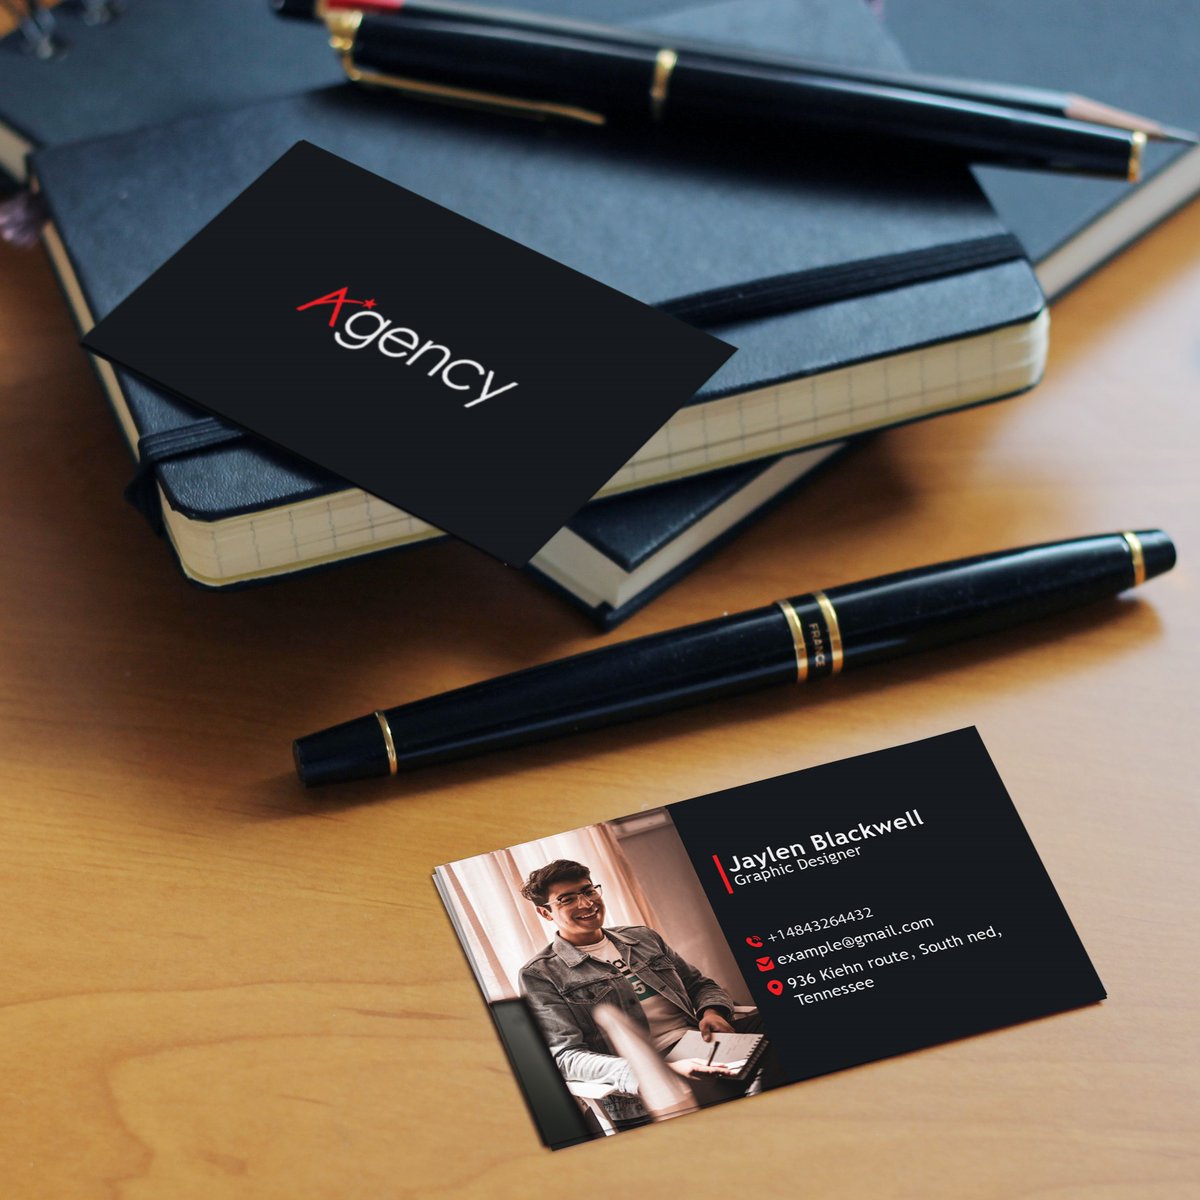 ✨ Professional Business Card Design.
For agencies and IT related companies.
Now available for graphic design services.

#graphicdesign #graphicdesigner #printabledesign #printabledesigns #businesscard #businesscards #businesscarddesign #agency #abdullatif #al #hireme